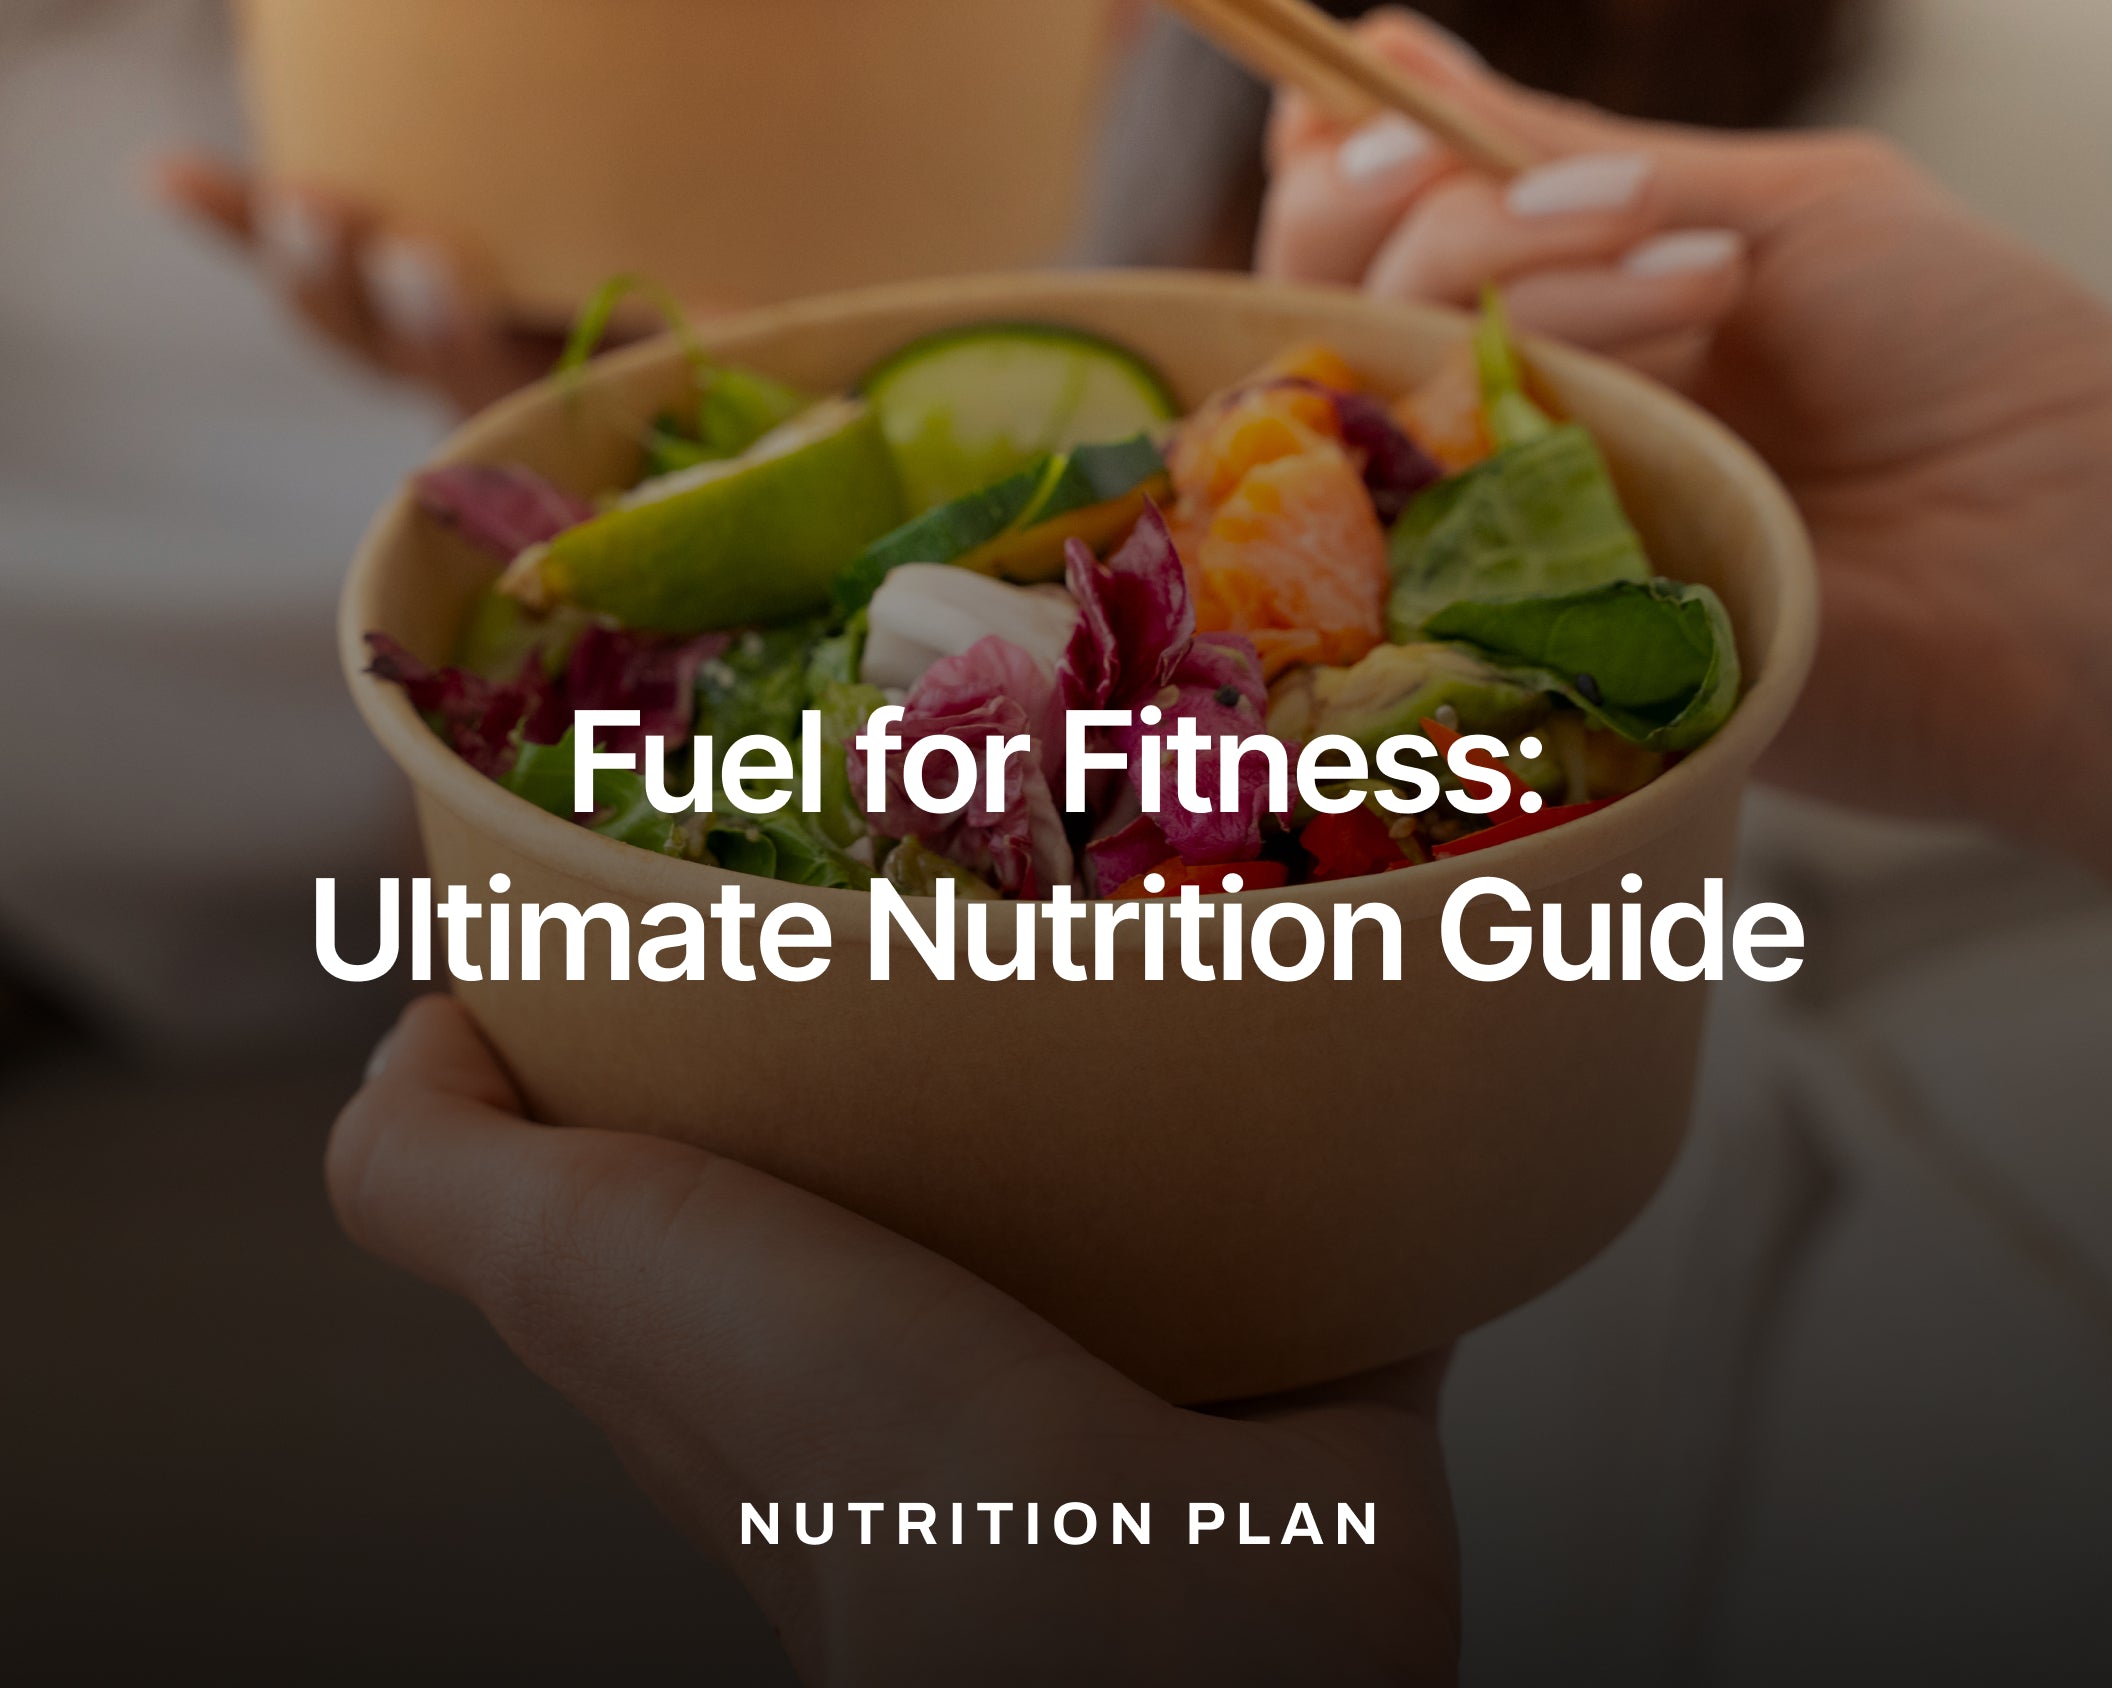 Fuel for Fitness: Ultimate Nutrition Guide